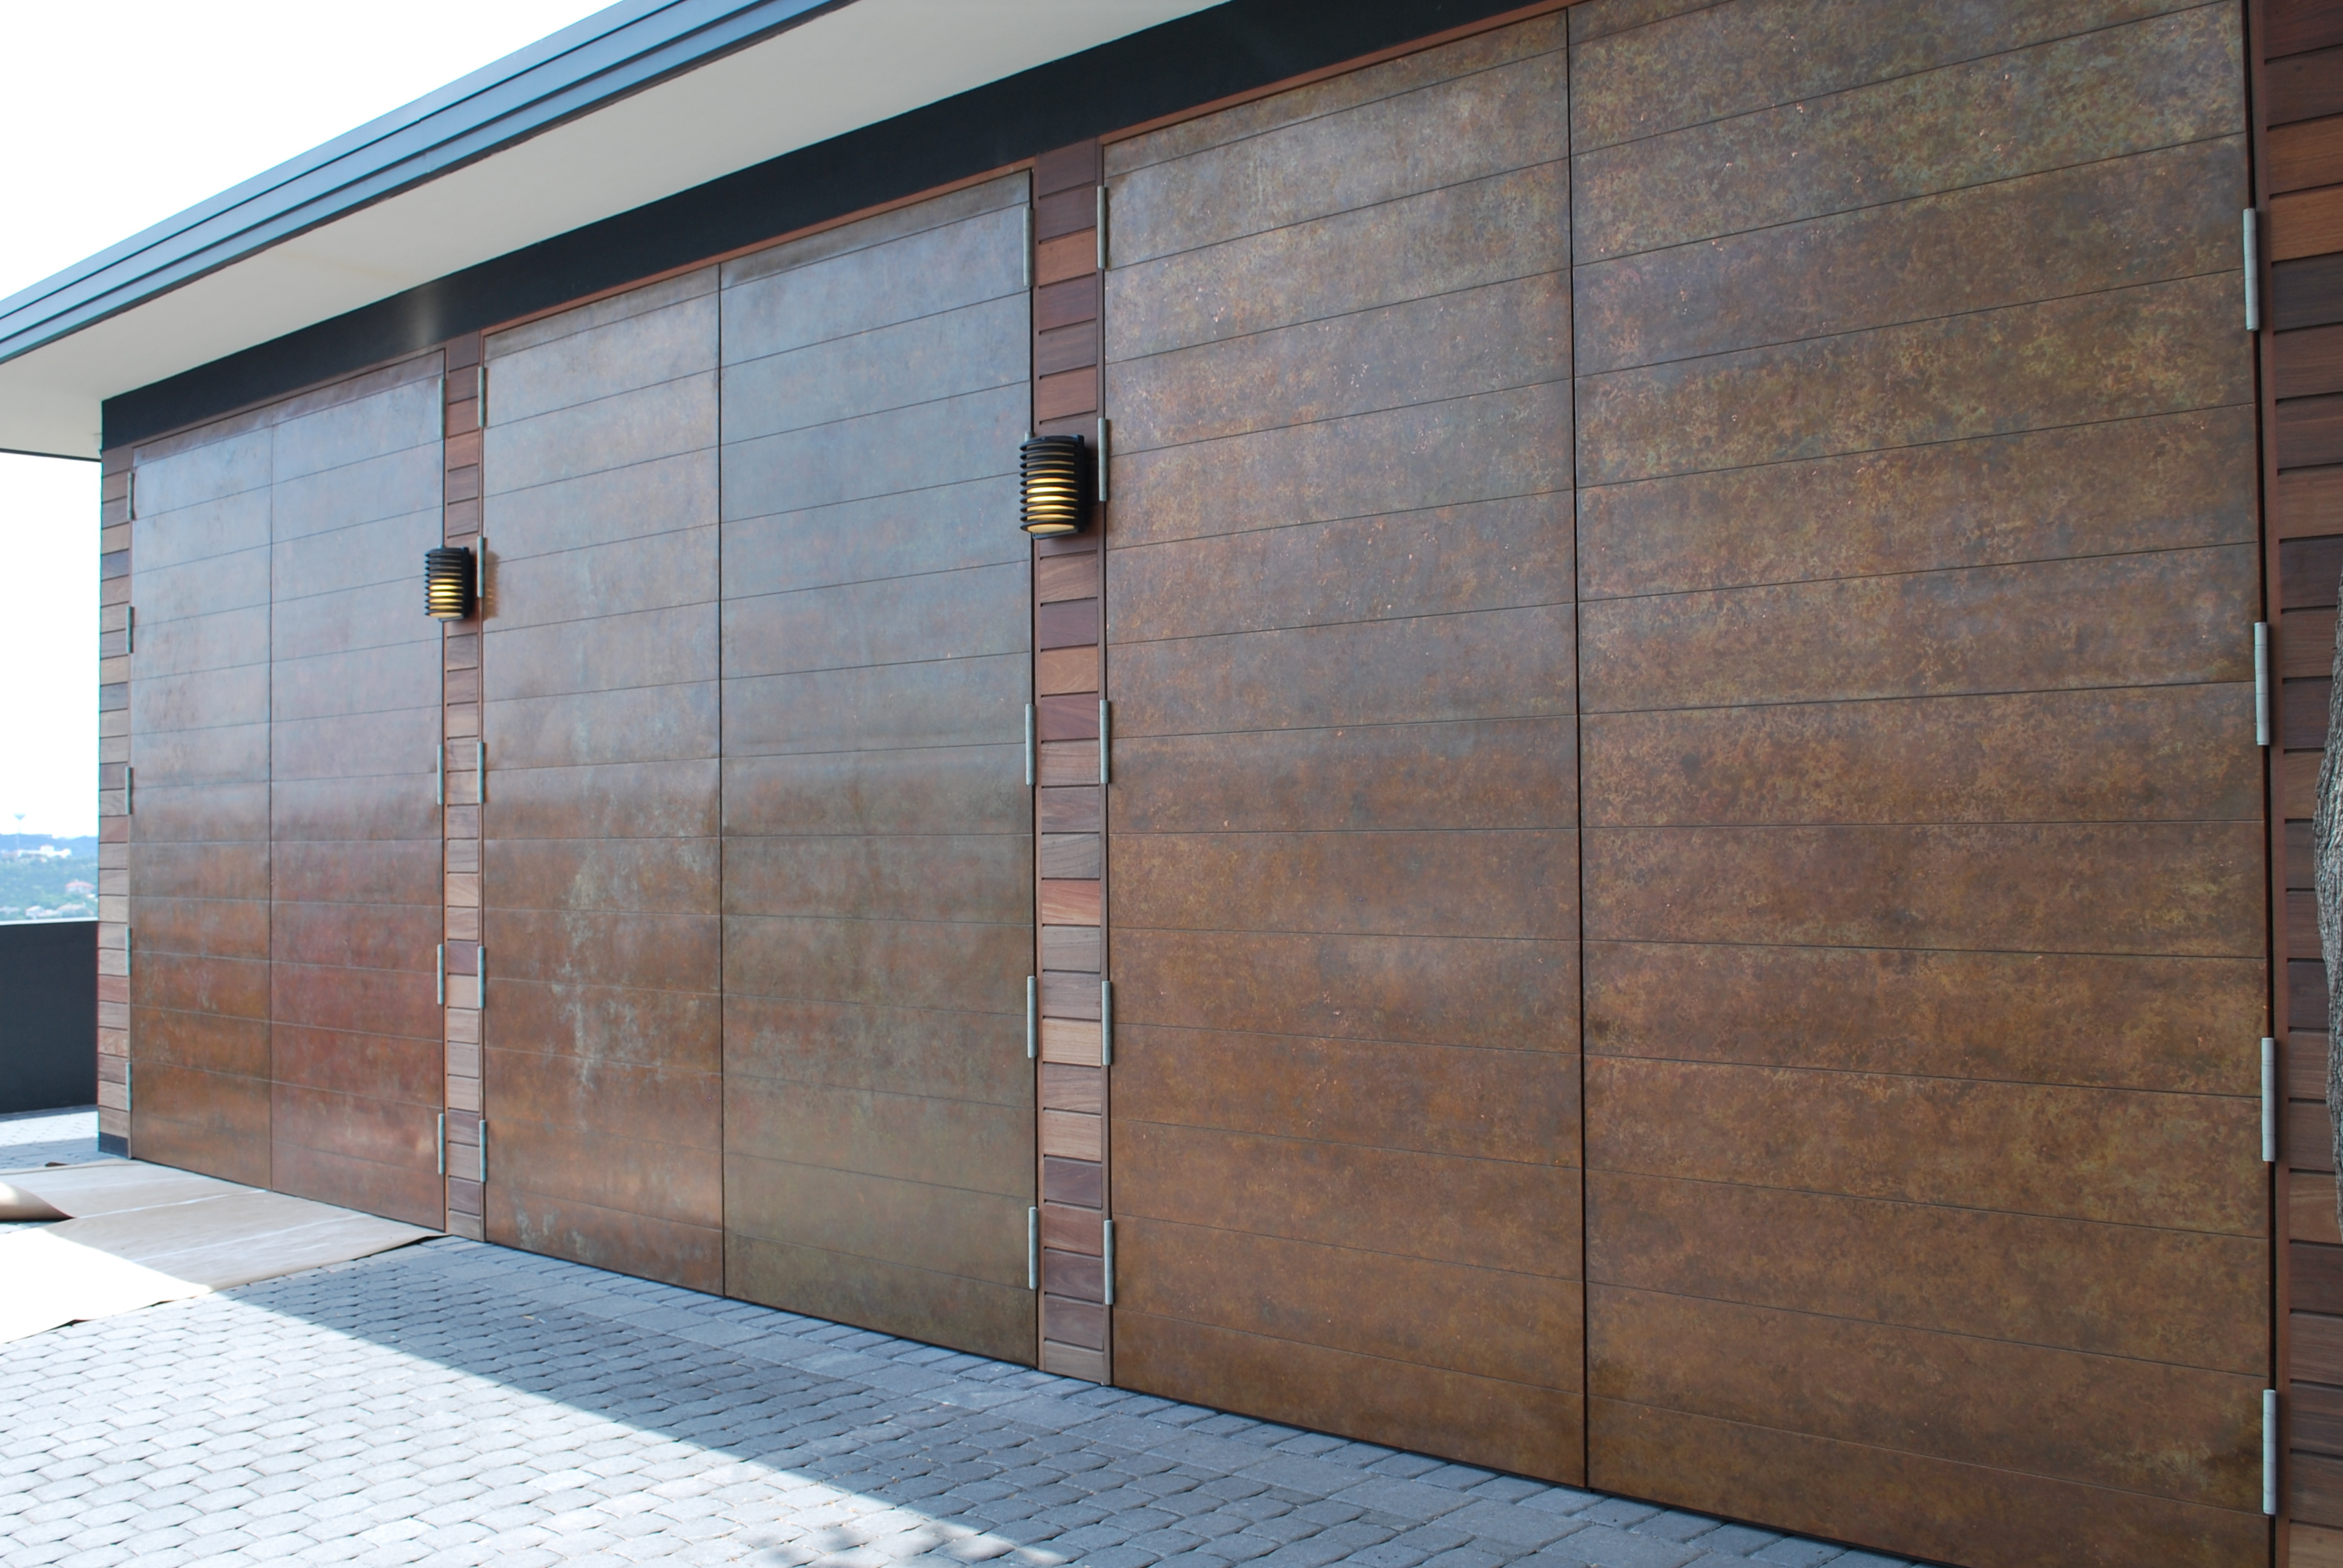 DD-copper-clad-swing-doors-with-individual-panels-to-match-siding